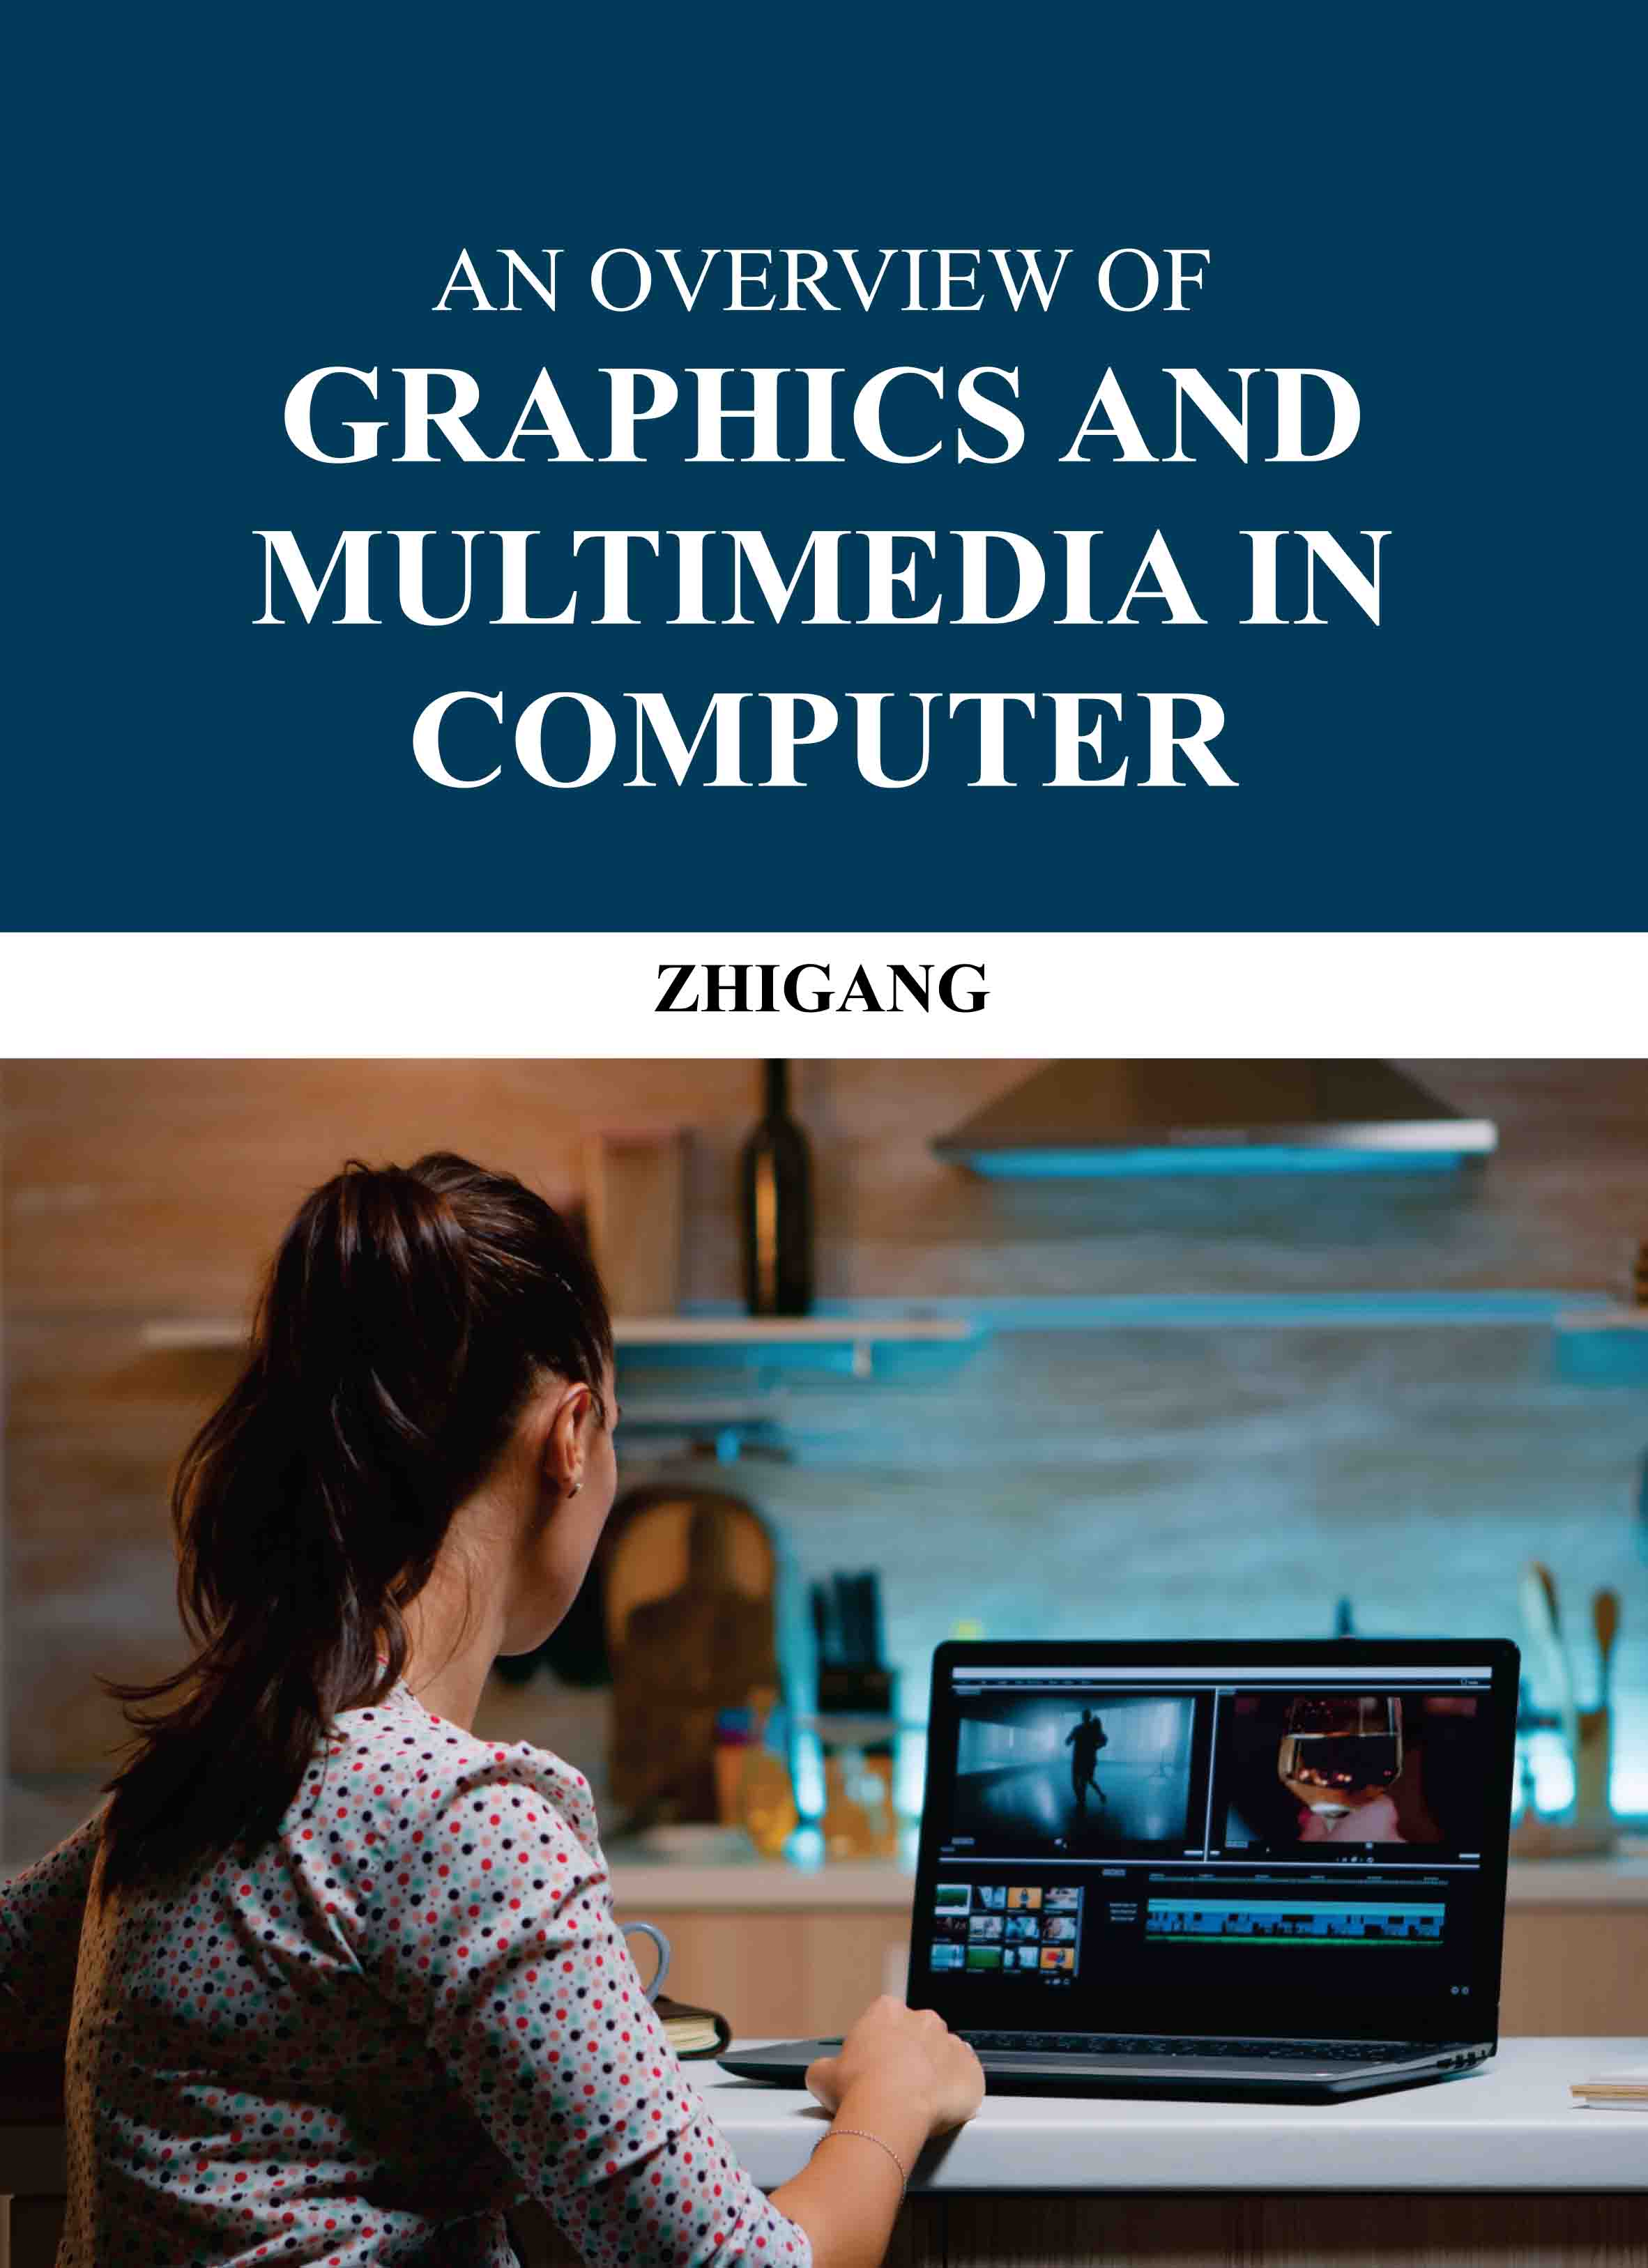 An Overview of Graphics and Multimeida in Computer